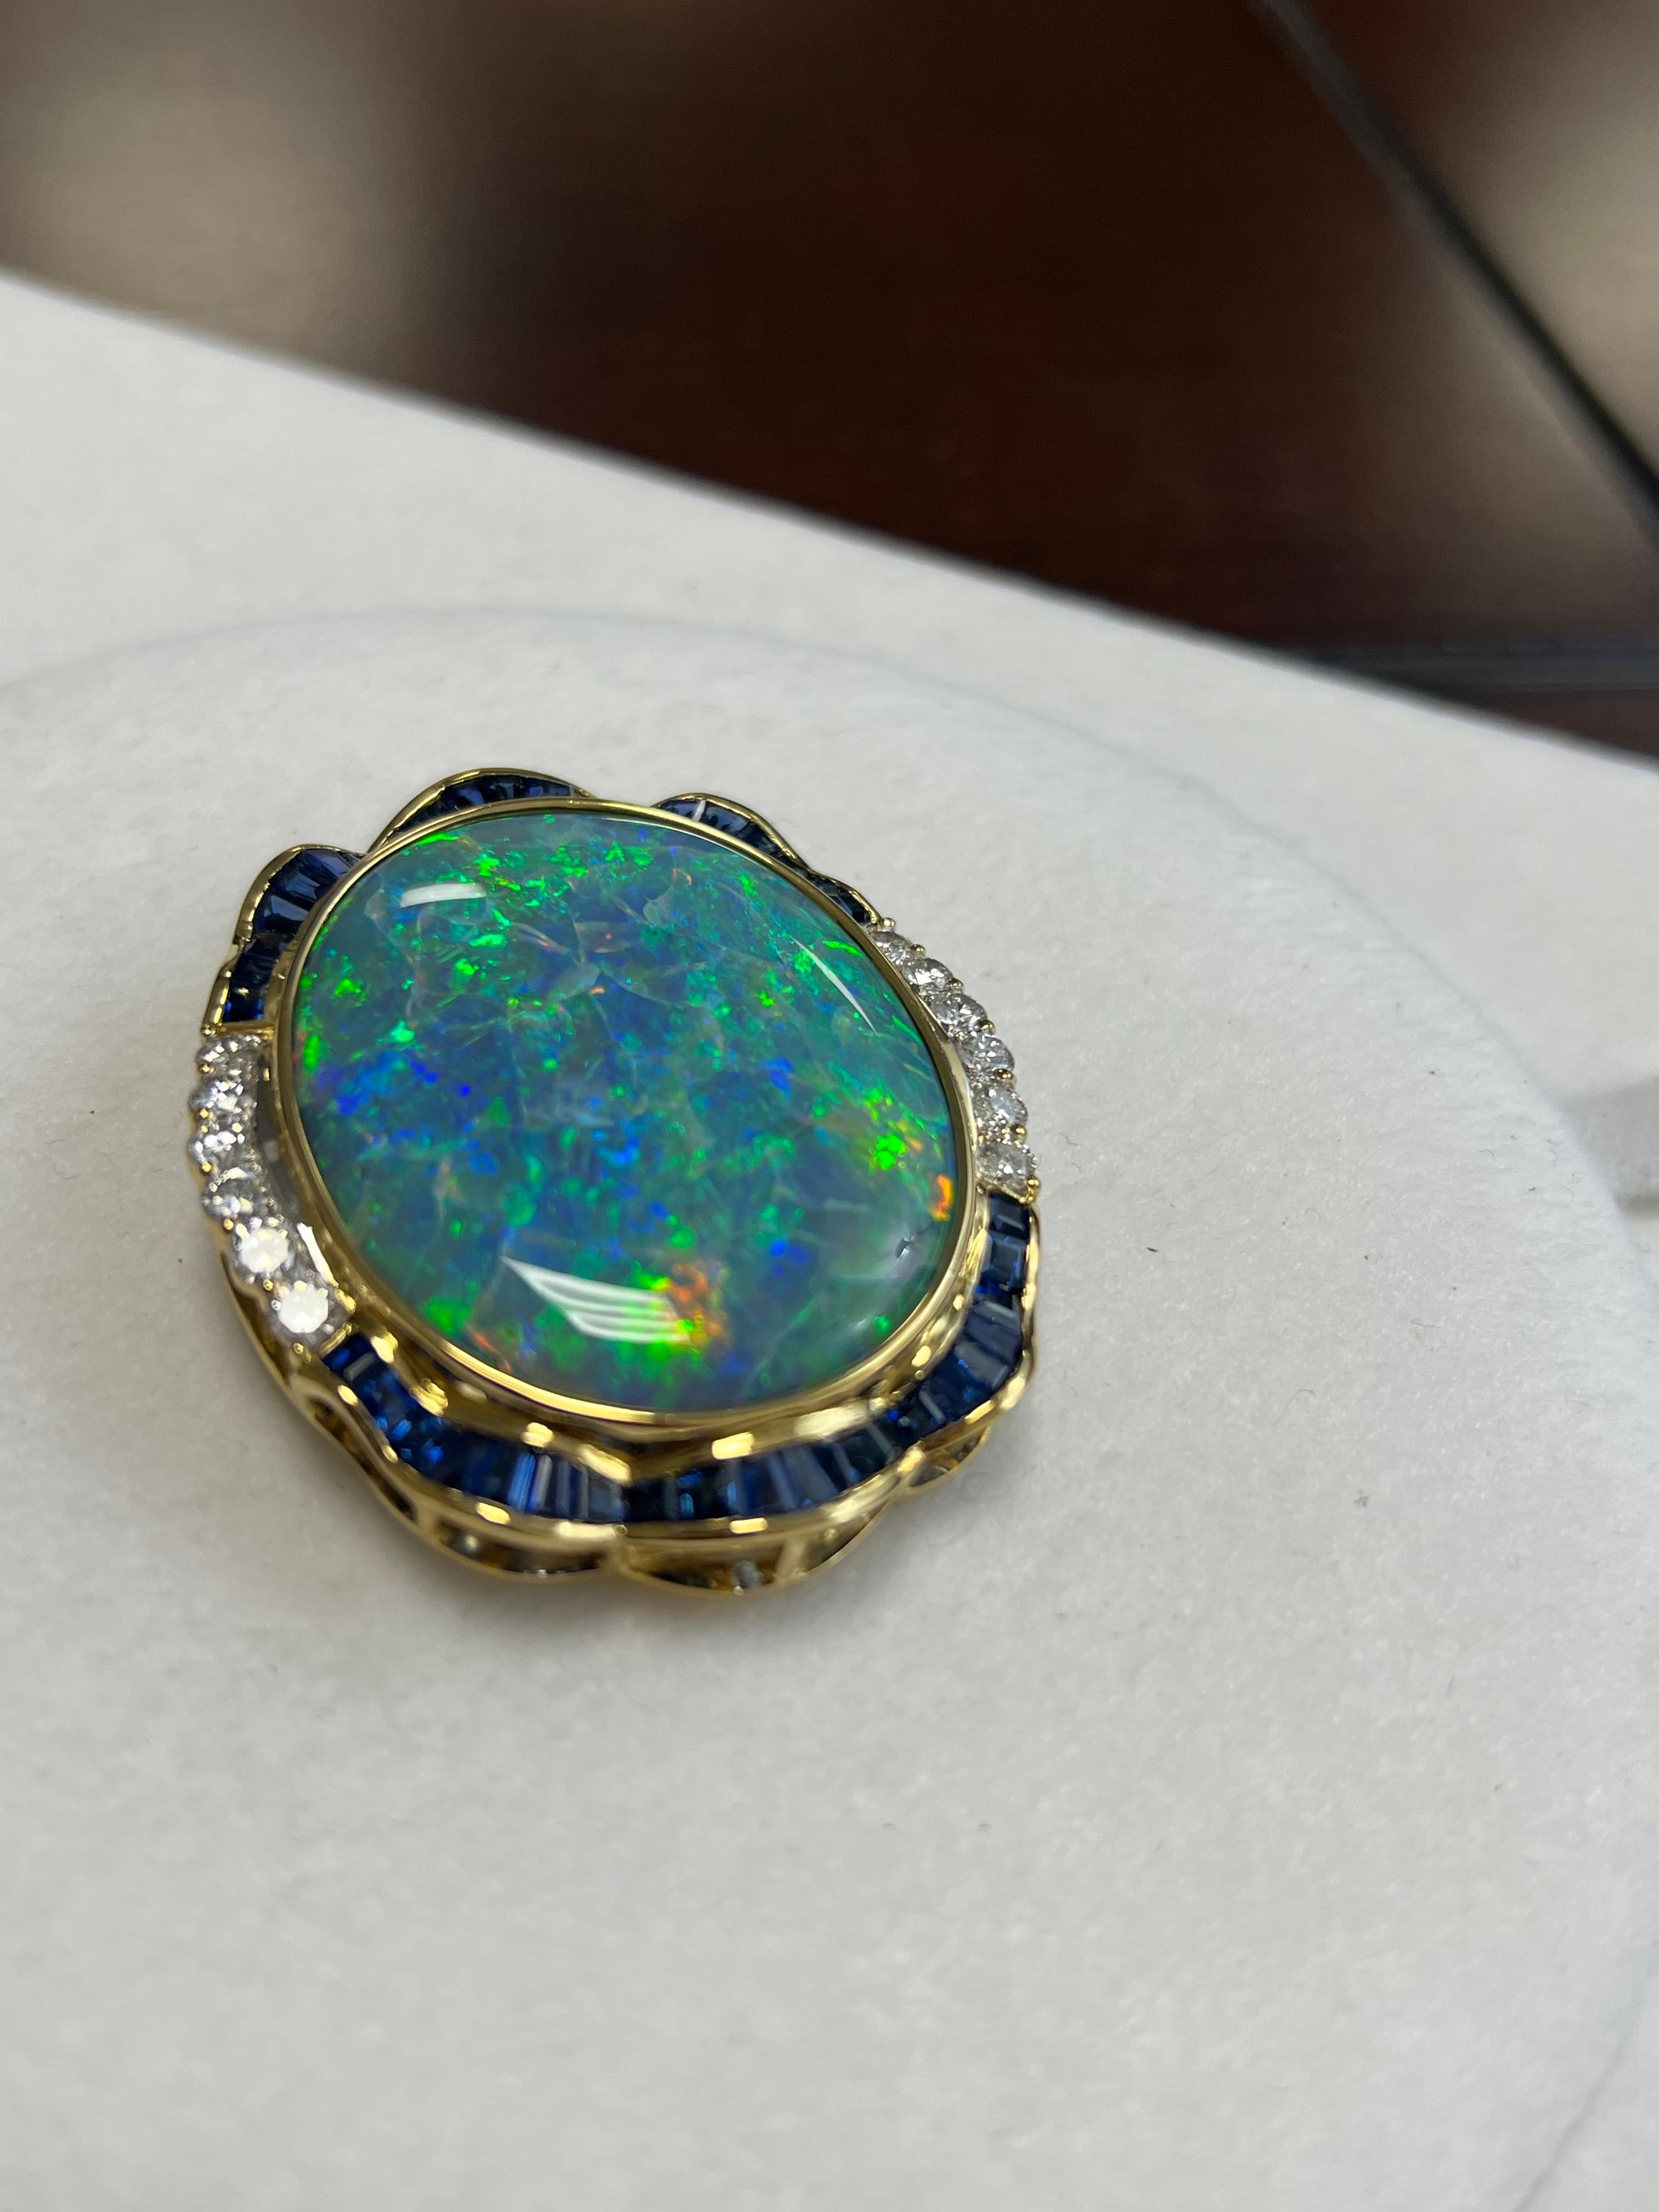 One lady's black opal in blue-green fire color. Vivid saturation scale with flash fire pattern. Brightness of fire is extremely bright with cabochon, oval shape. Measurements are 40.0 x 32.0 mm. Weight is 91.0 carats. 40 baguette blue sapphire.